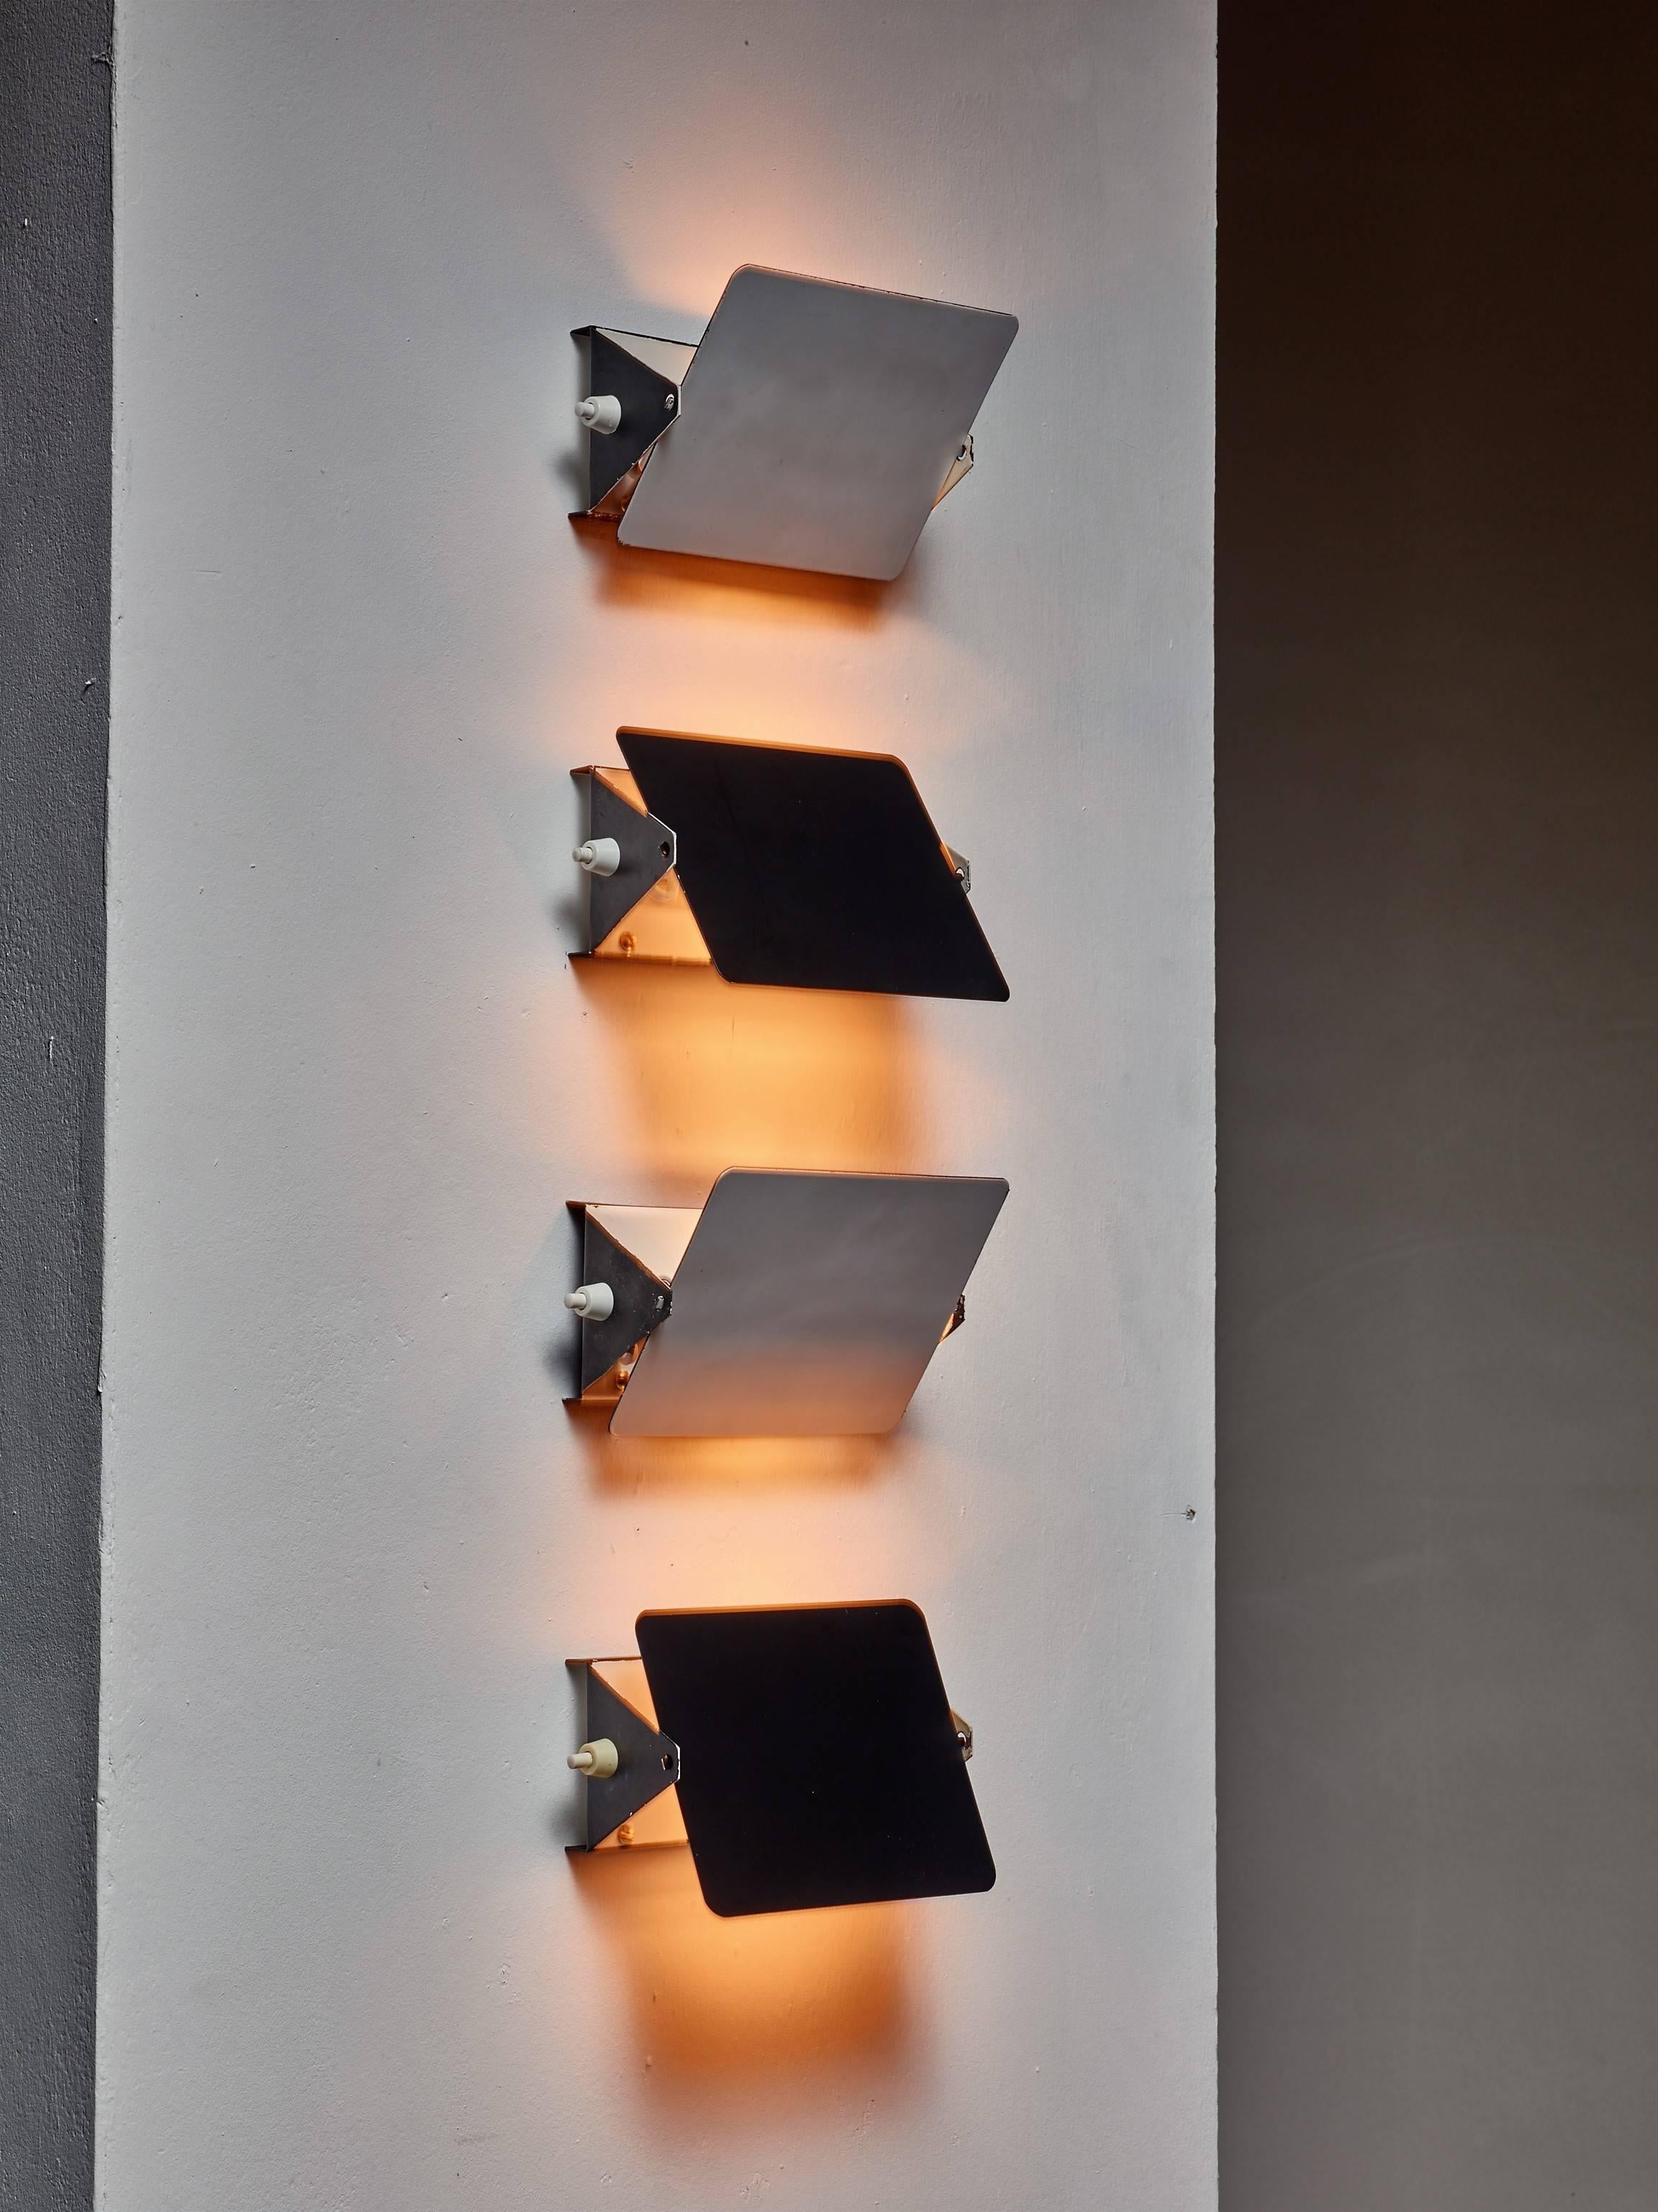 A set of four Charlotte Perriand CP1 wall appliques with an enameled metal adjustable deflector. One side of the deflector is white and the other is black. The lamps have an E14 fitting.

These items are from the Arc 1600 ski resort in Les Arcs